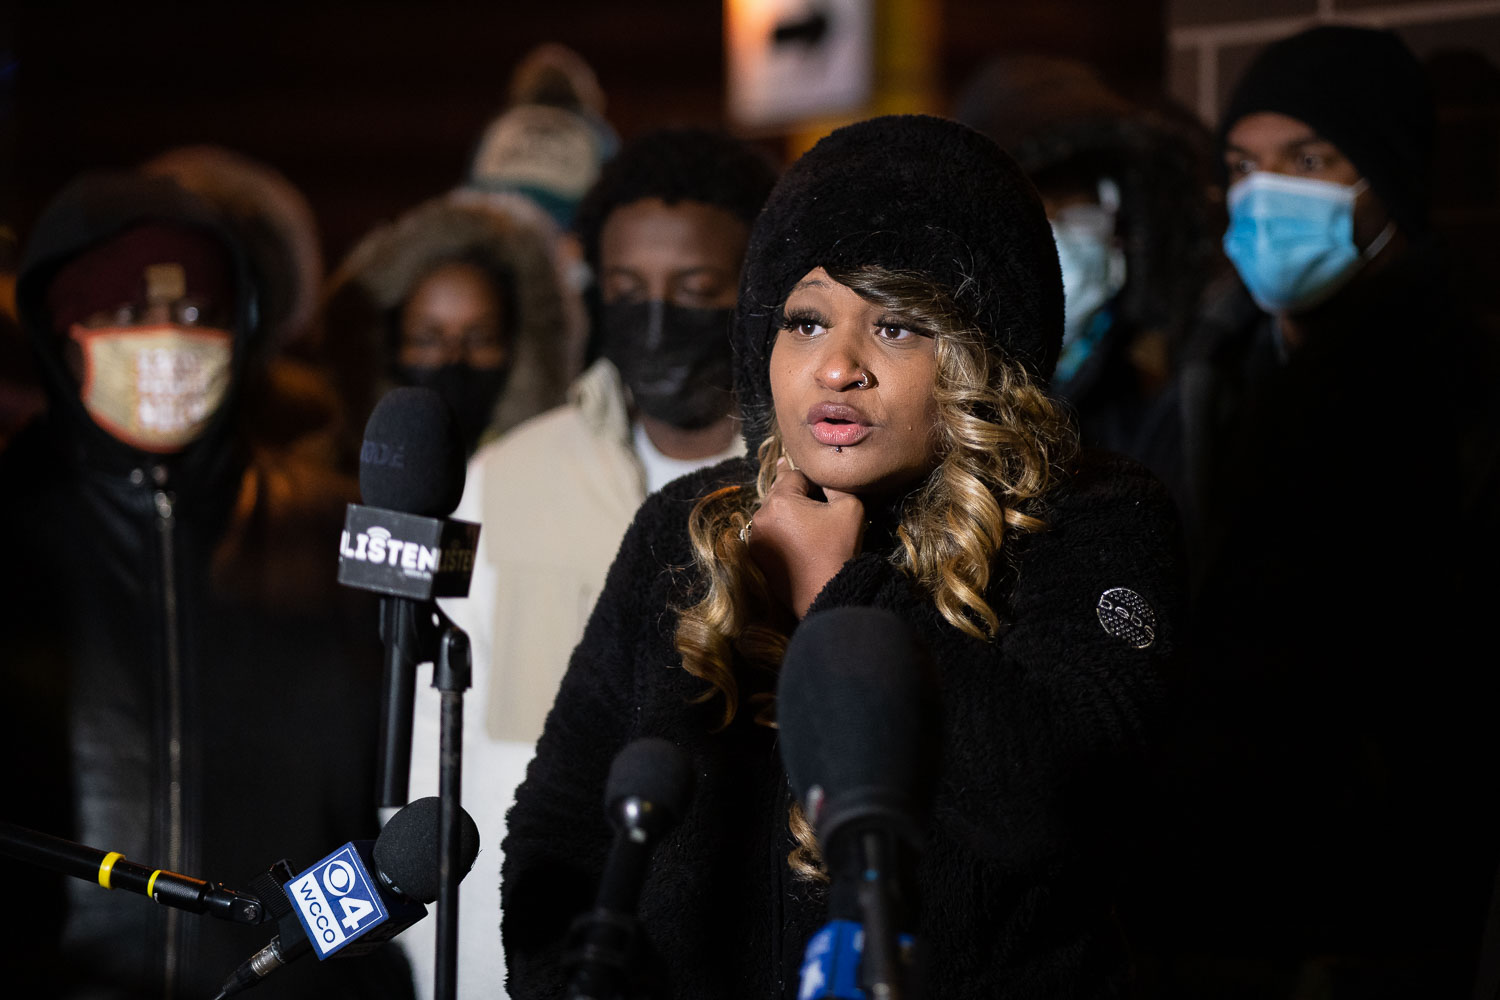 Civil rights attorney Nekima Levy Armstrong, CAIR-MN and MN Senate candidate Zaynab Mohamed, activists DJ Hooker & Toshira Garraway Allen speak out in a cold 1°F night asking for the prompt release of information regarding the shooting death of Amir Locke by police this morning.